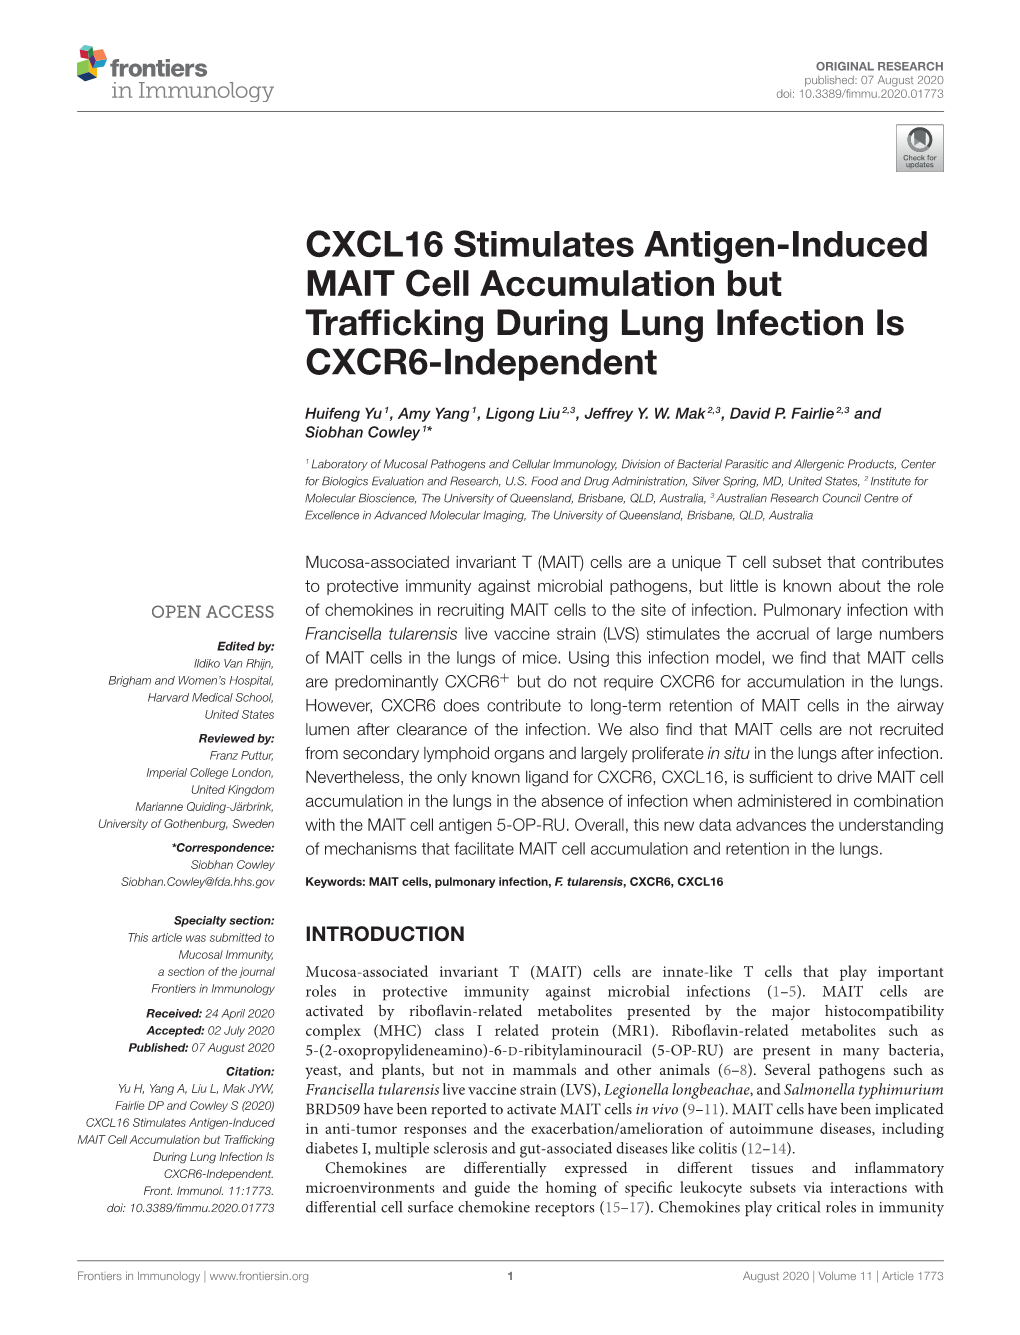 CXCL16 Stimulates Antigen-Induced MAIT Cell Accumulation but Trafﬁcking During Lung Infection Is CXCR6-Independent